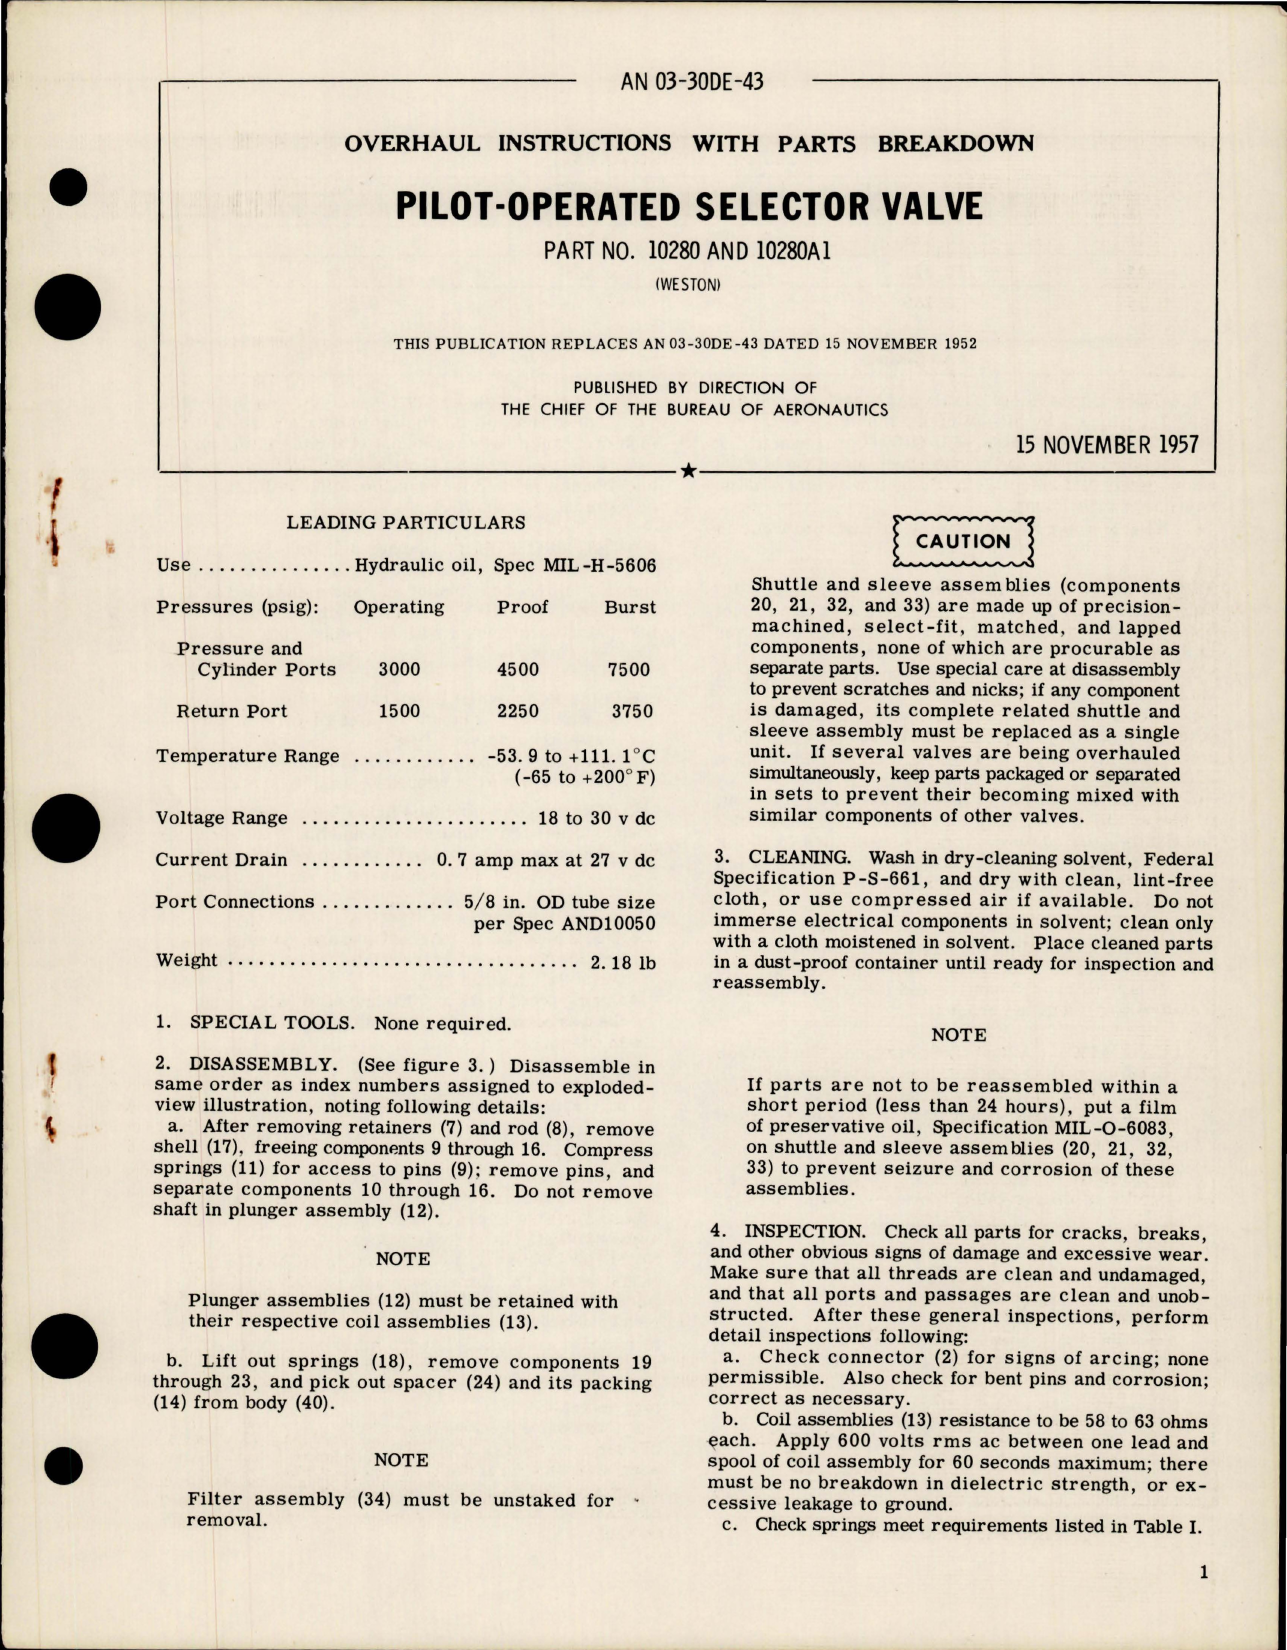 Sample page 1 from AirCorps Library document: Overhaul Instructions with Parts Breakdown for Pilot-Operated Selector Valve - Part 10280 and 10280A1 